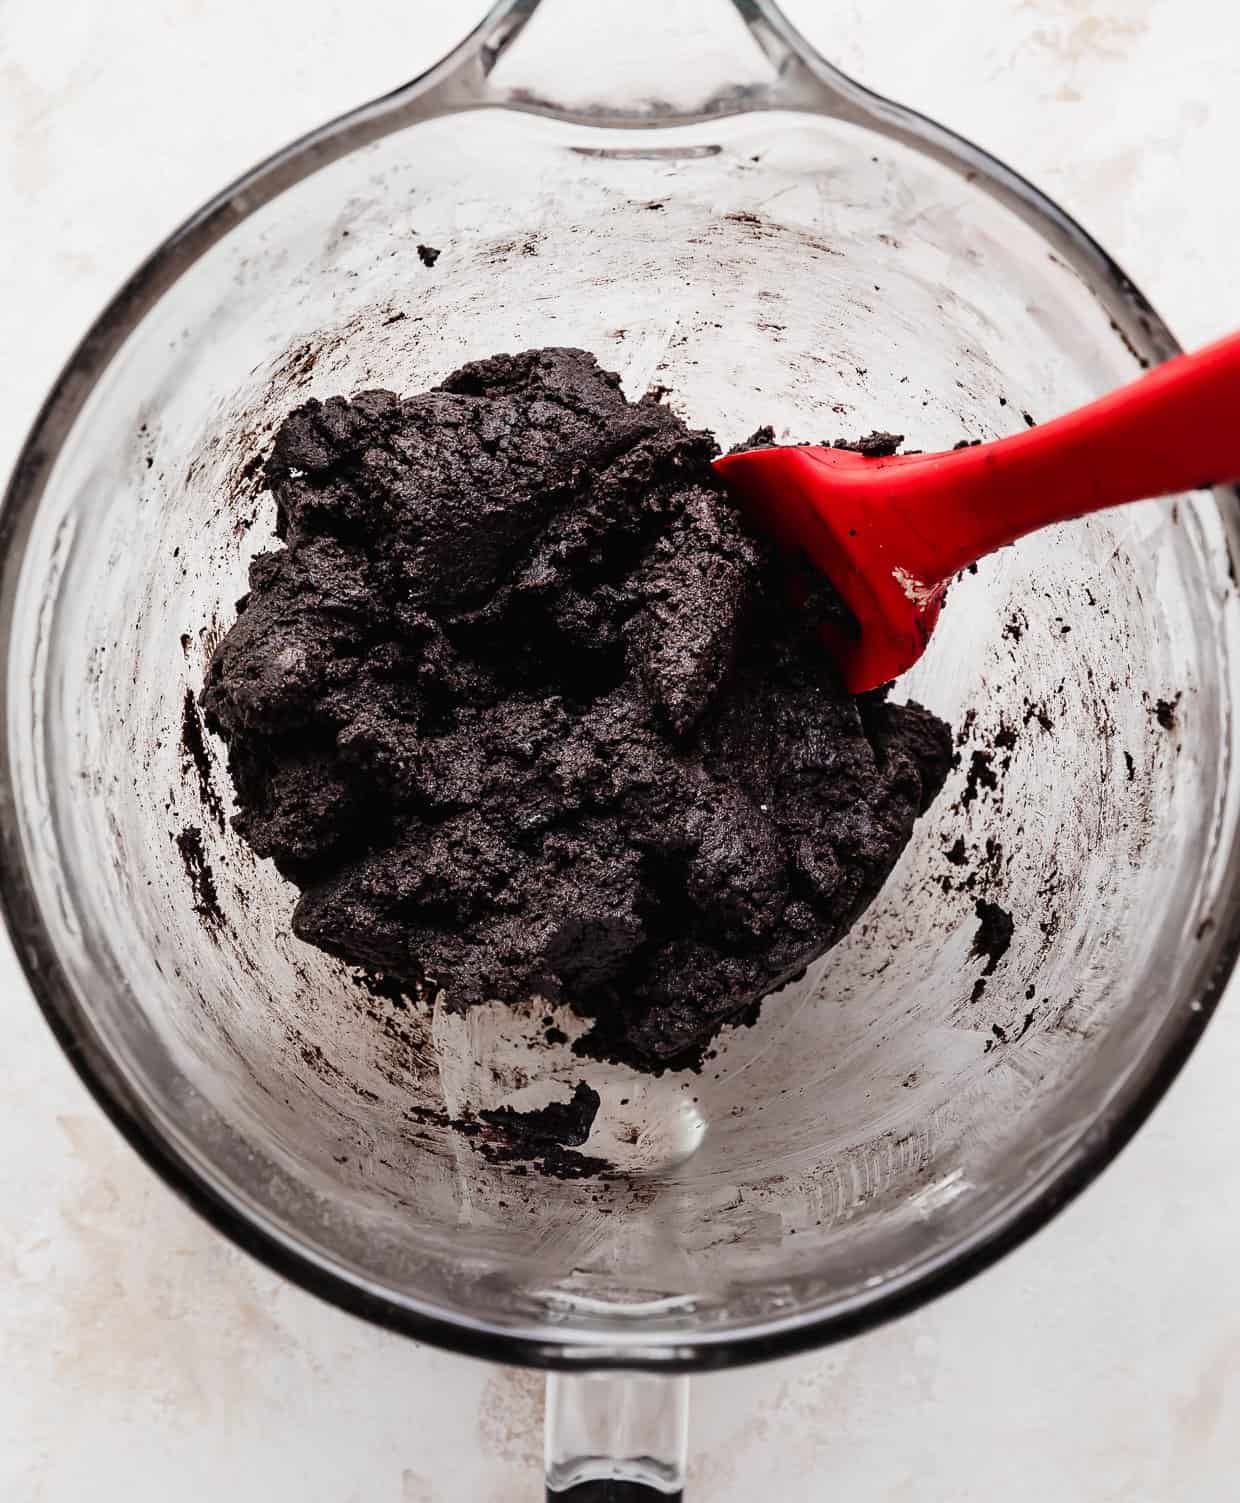 Oreo Birthday Cake Cookie dough in a glass mixing bowl on a white background.